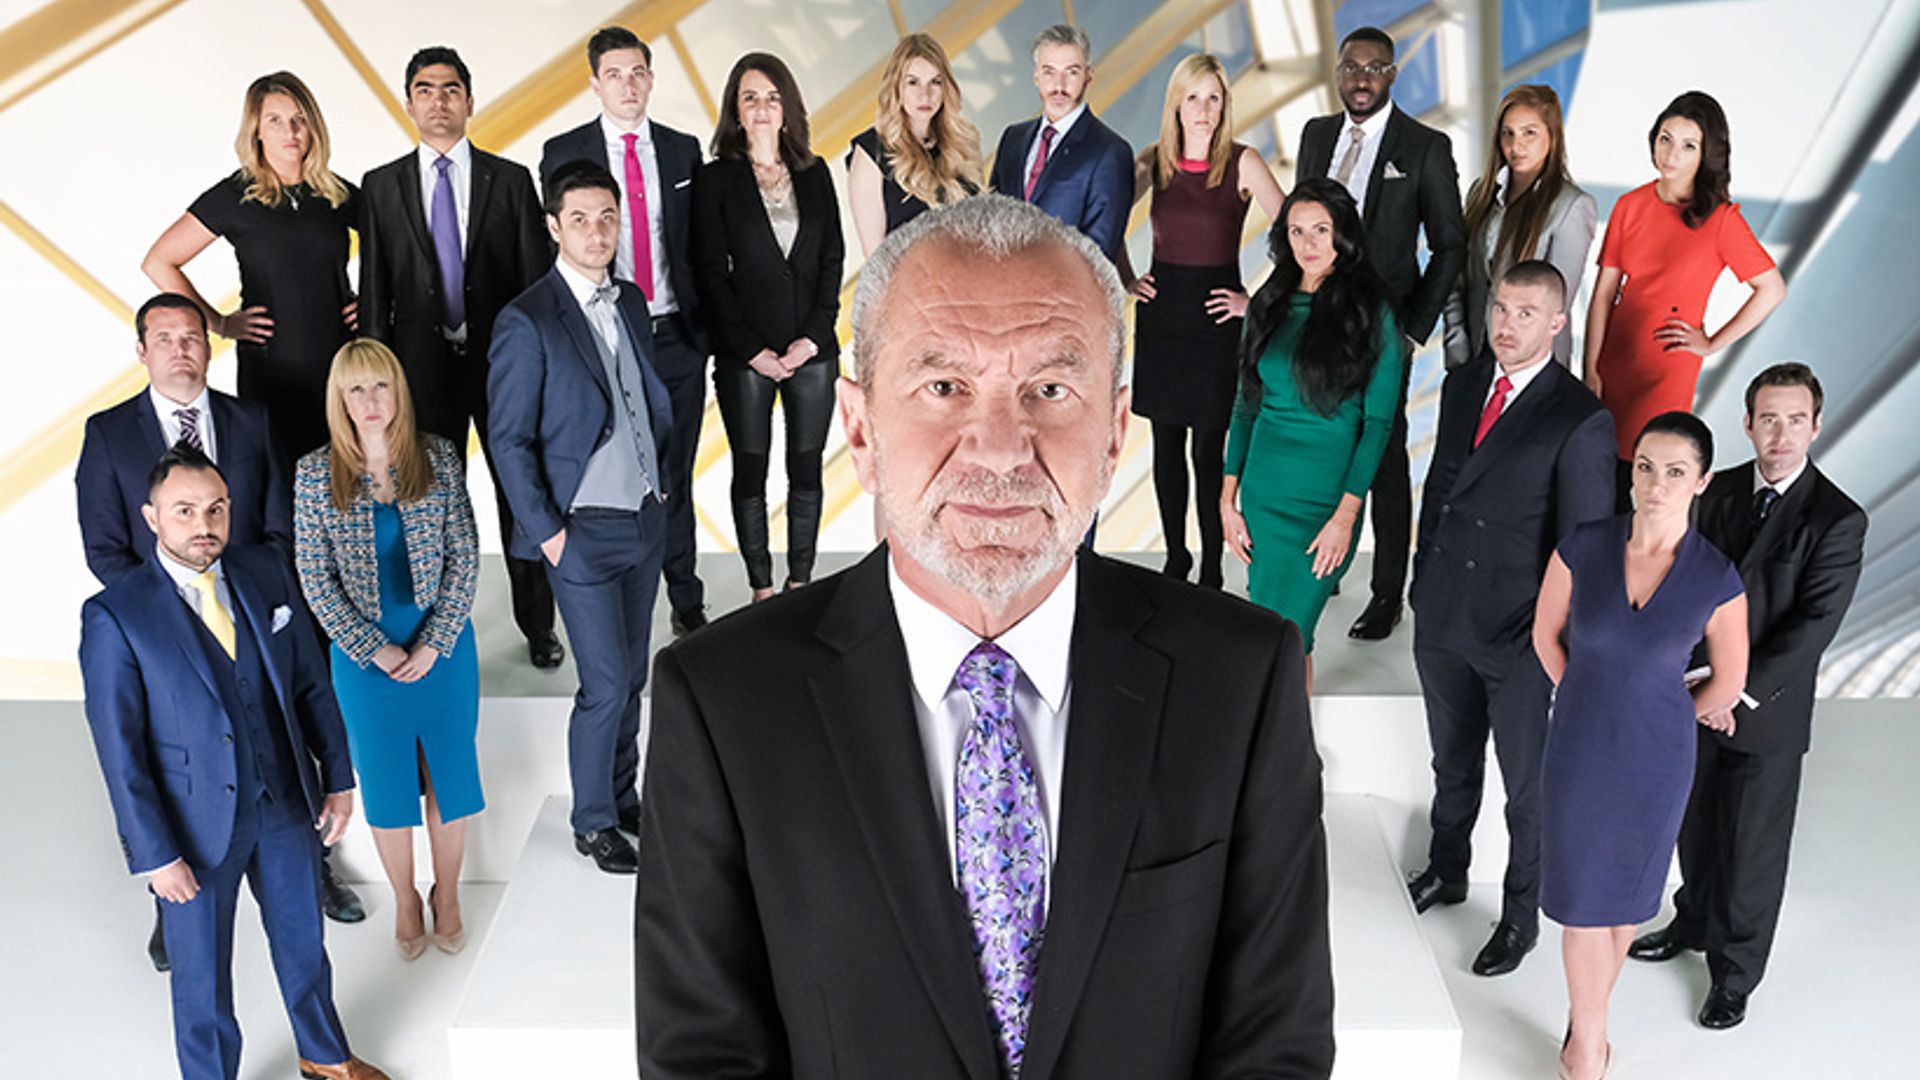 The Apprentice's first eliminated contestant admits: 'I thought Rebecca was going home'